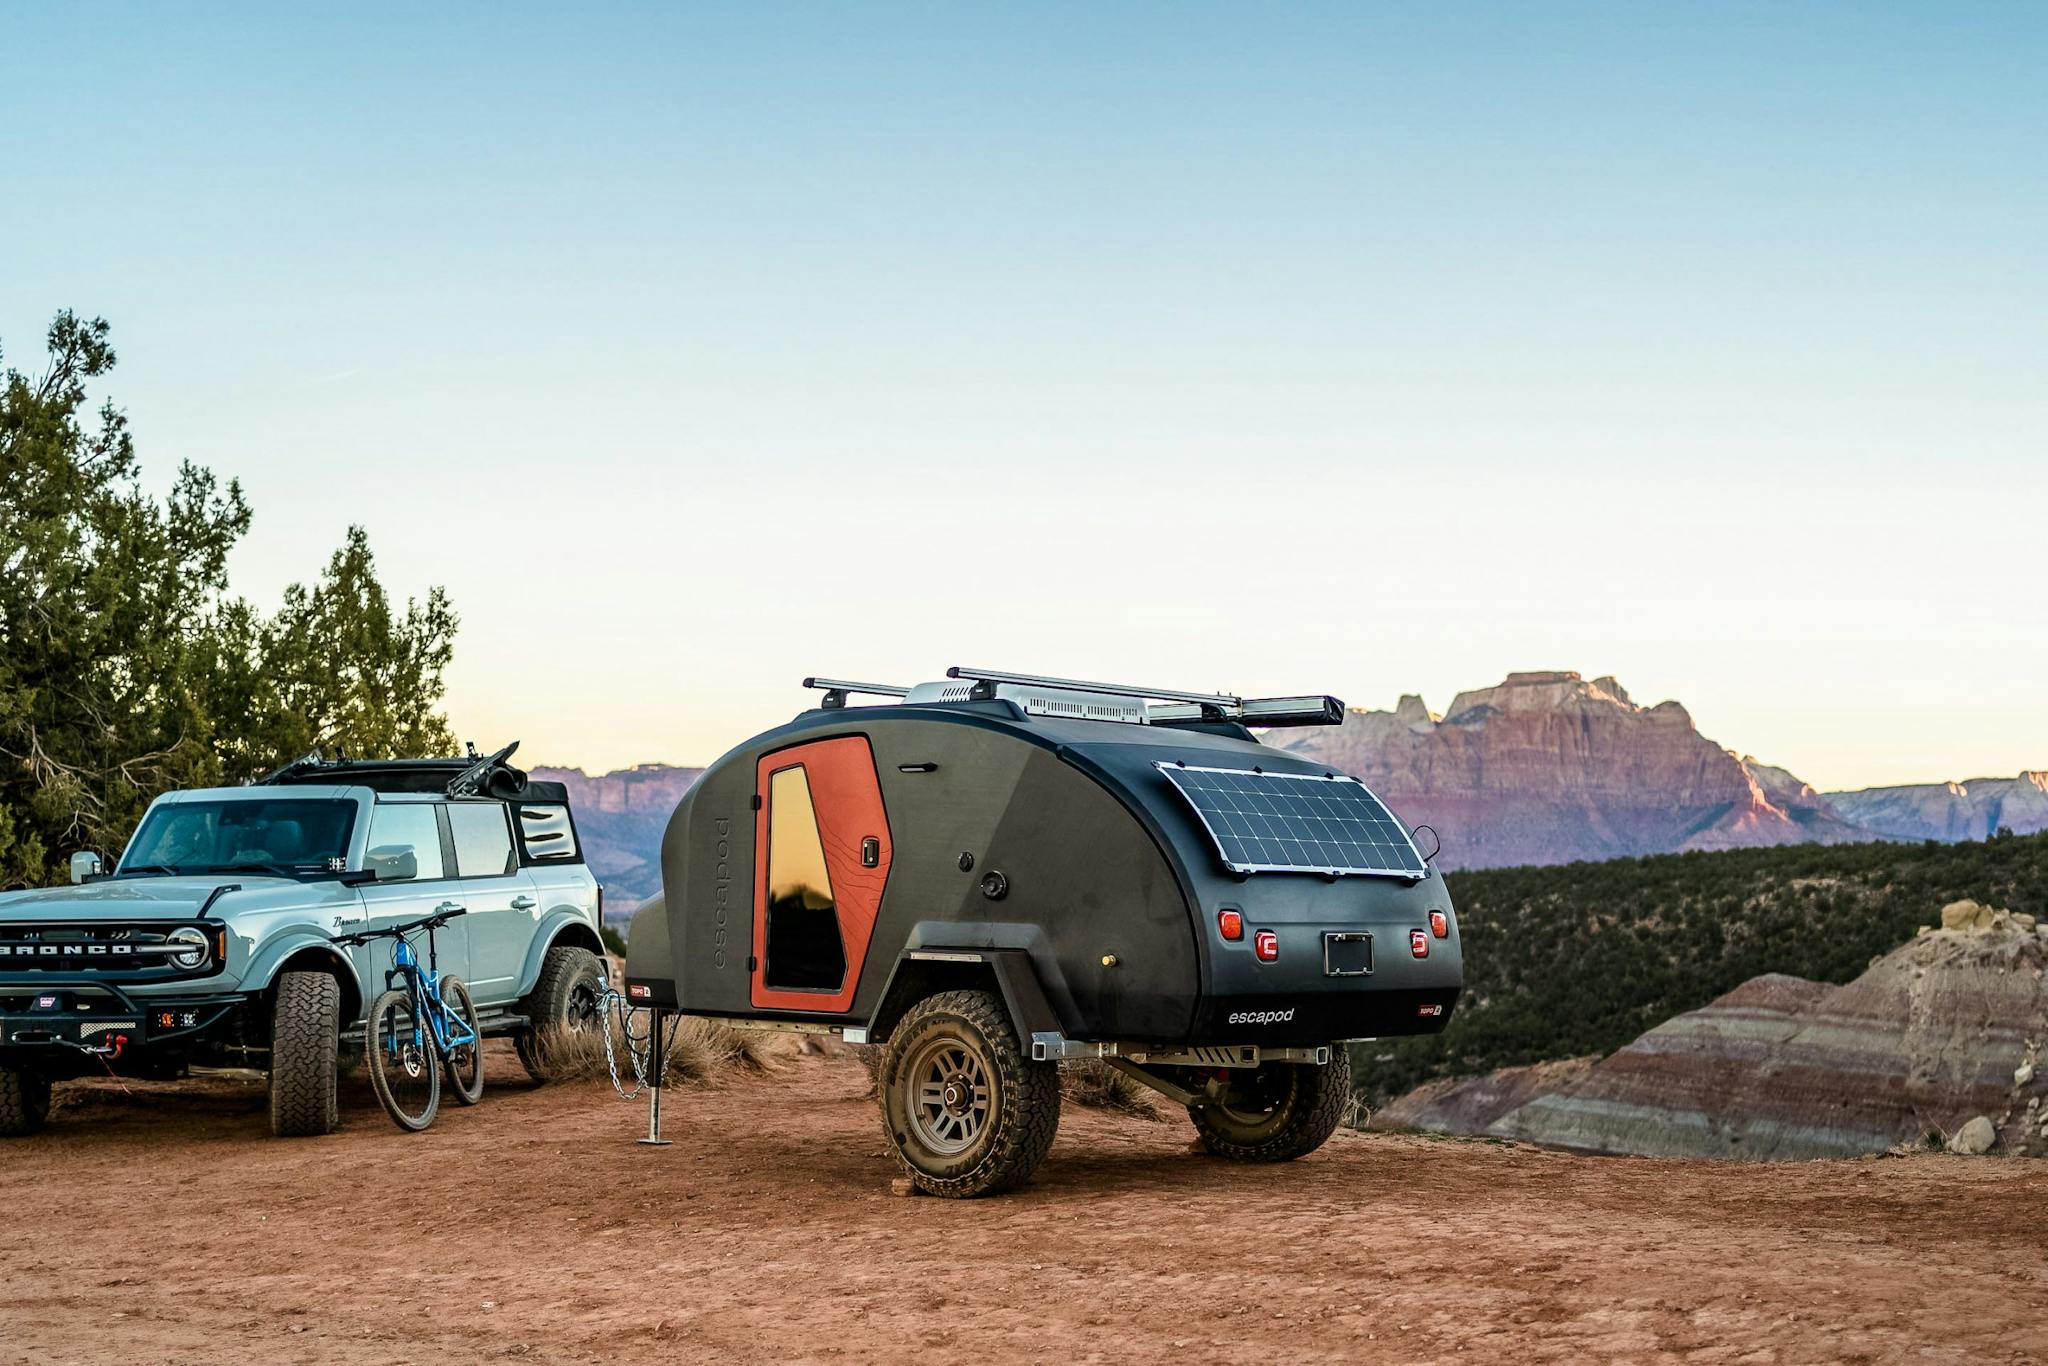 A navy blue teardrop camper being towed through desert landscape by a Ford Bronco.